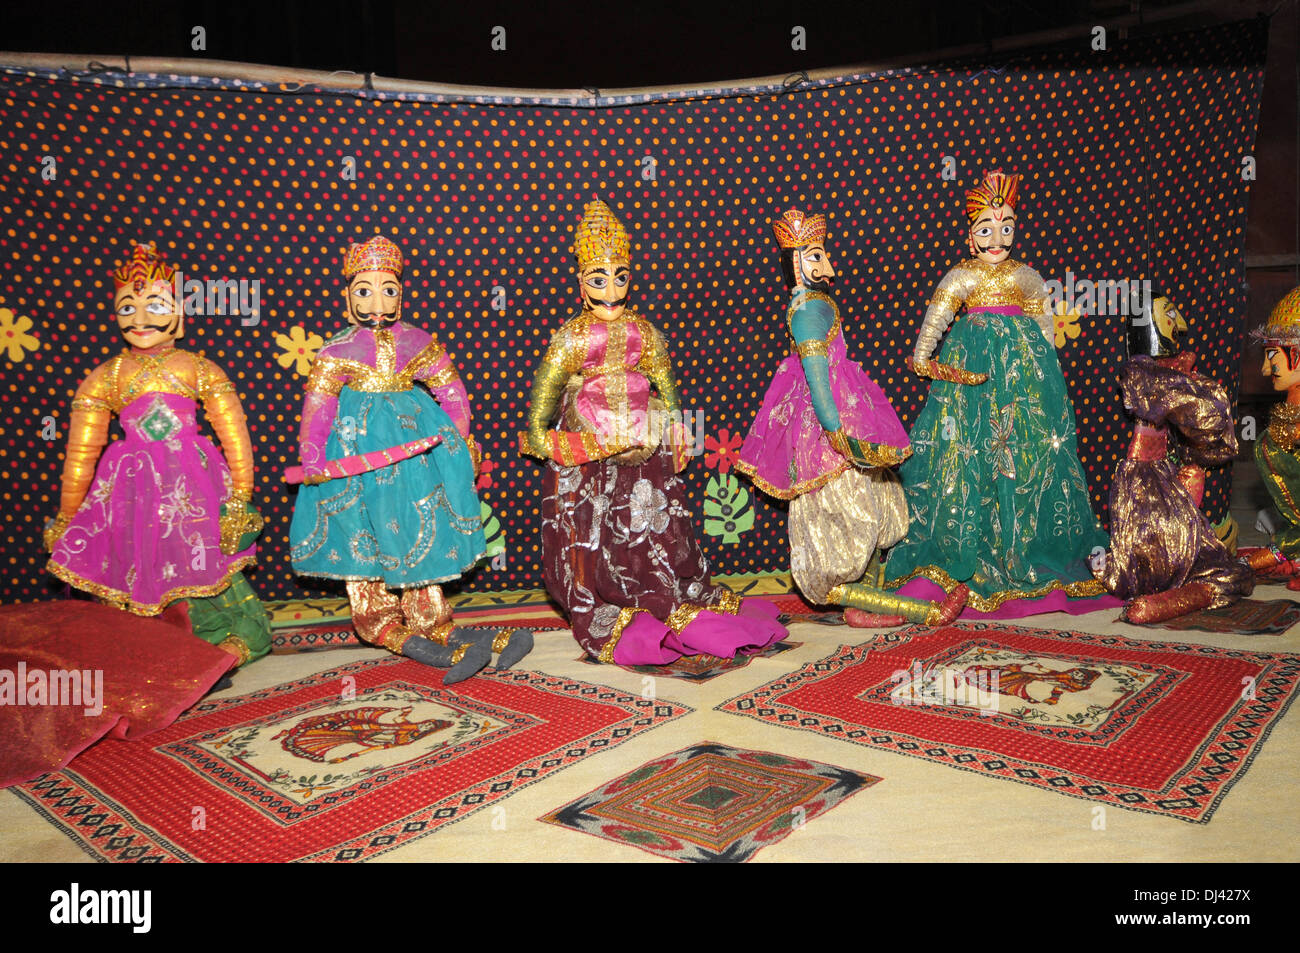 Puppet show, Shilpgram, Udaipur, Rajasthan India Stock Photo